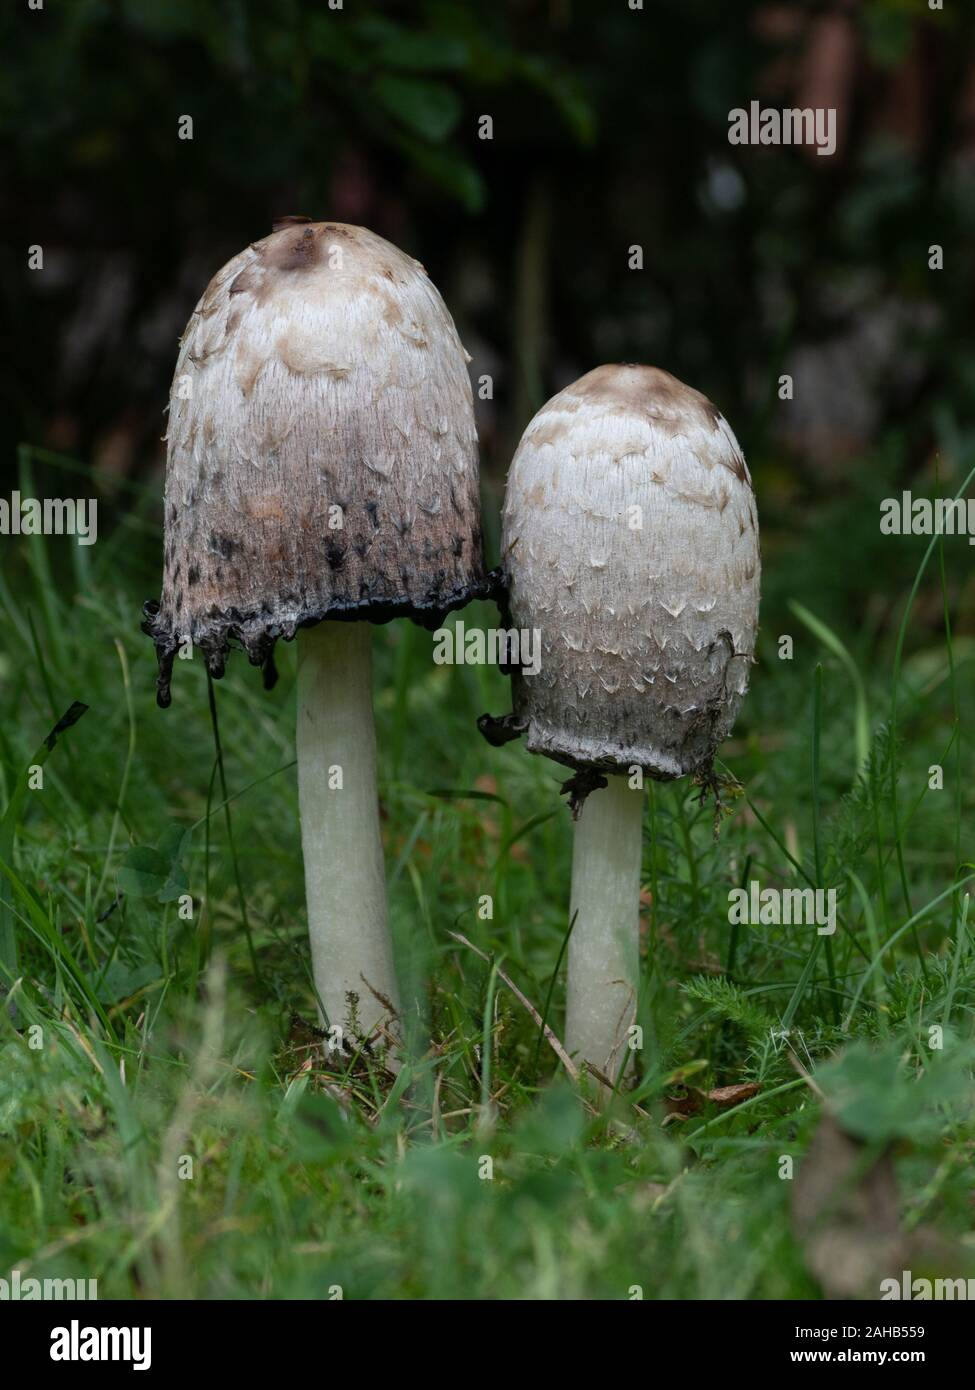 Coprinus comatus, the shaggy ink cap, lawyer's wig, or shaggy mane, is a common fungus often seen growing on lawns, along gravel roads and waste areas. Stock Photo